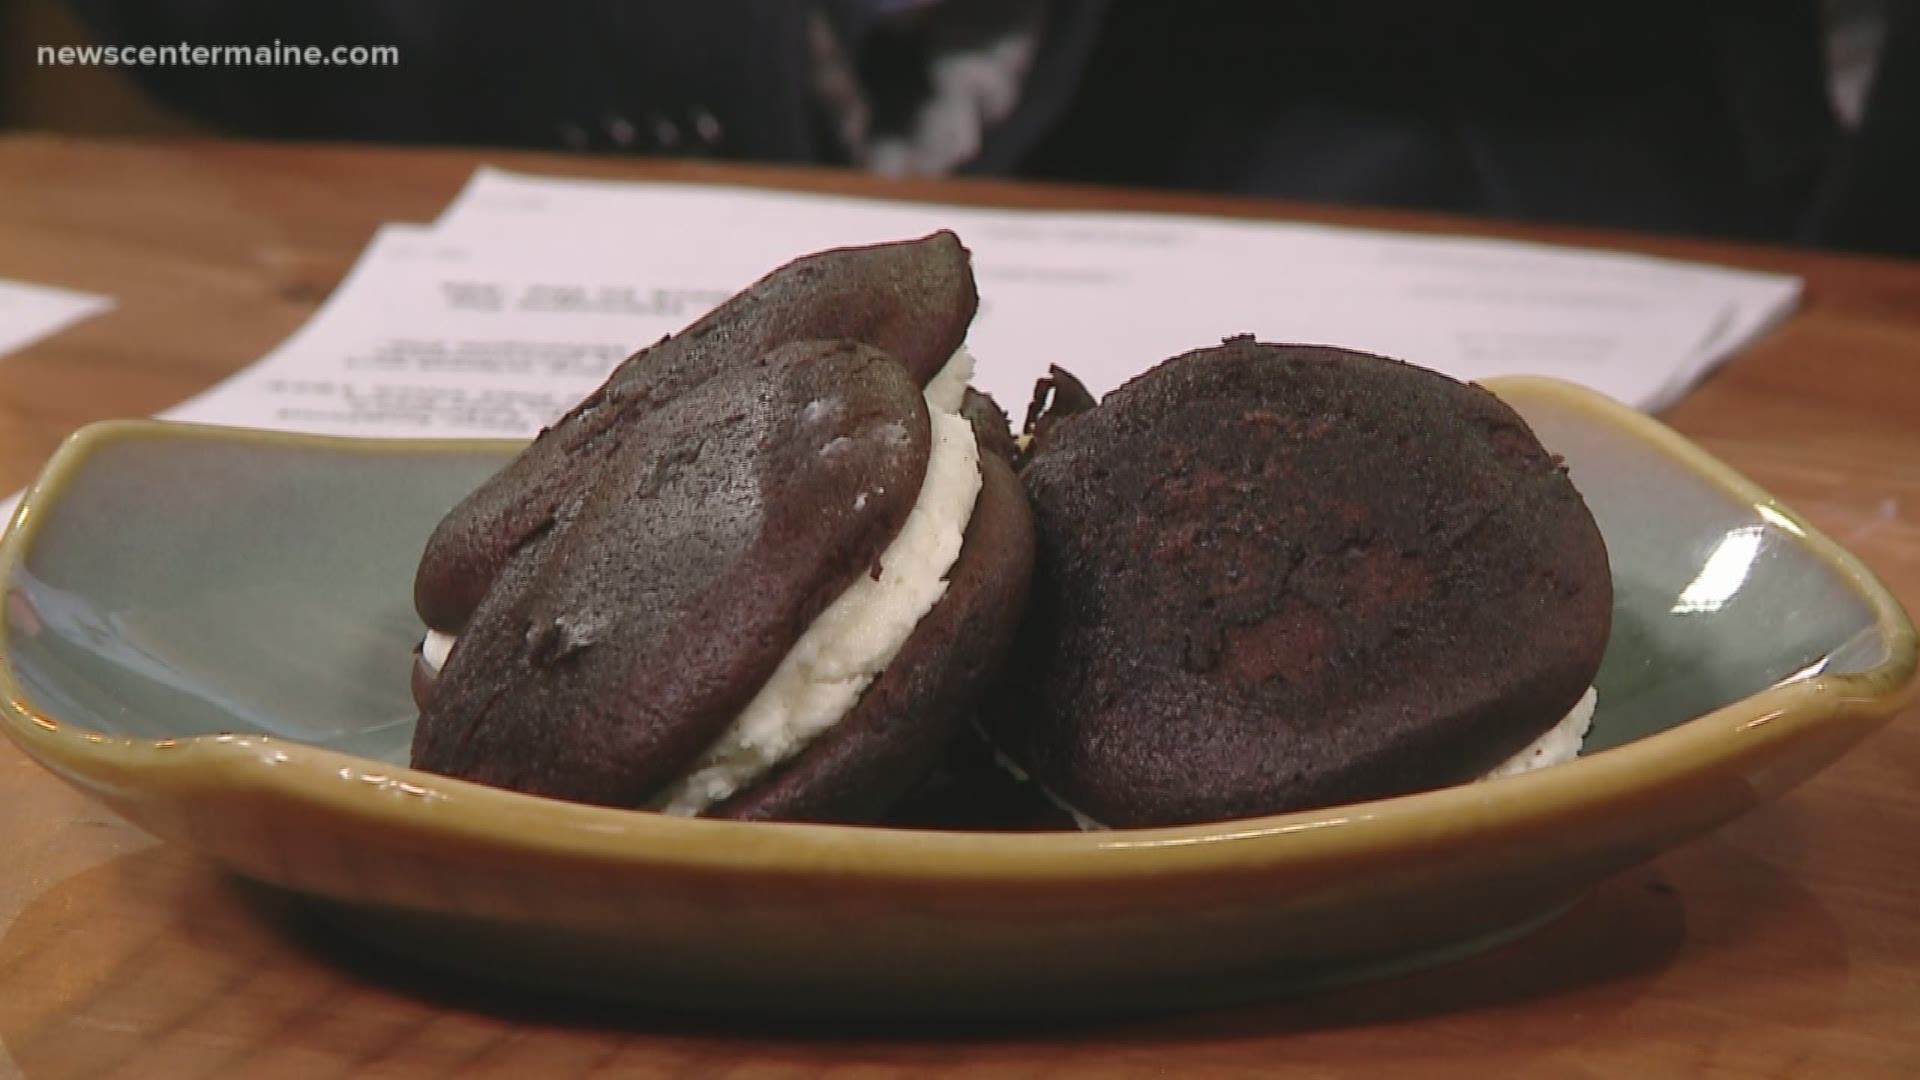 Maine's first Whoopie Pies were sold in a Lewiston Bakery